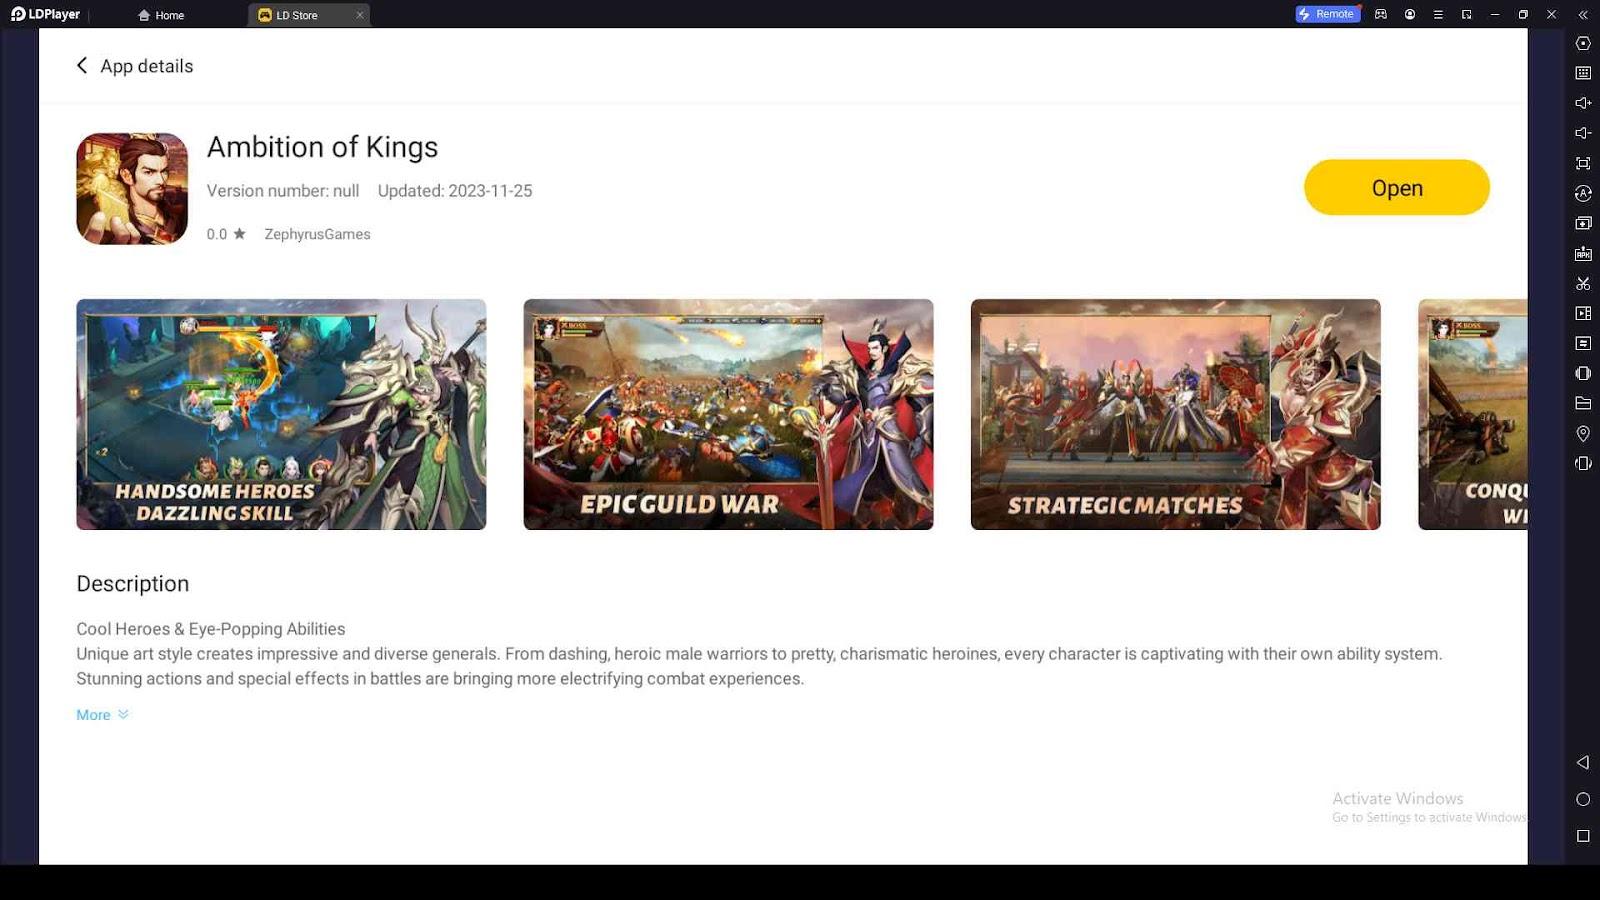 Playing Ambition of Kings with Immersive Gaming Experience from LDPlayer